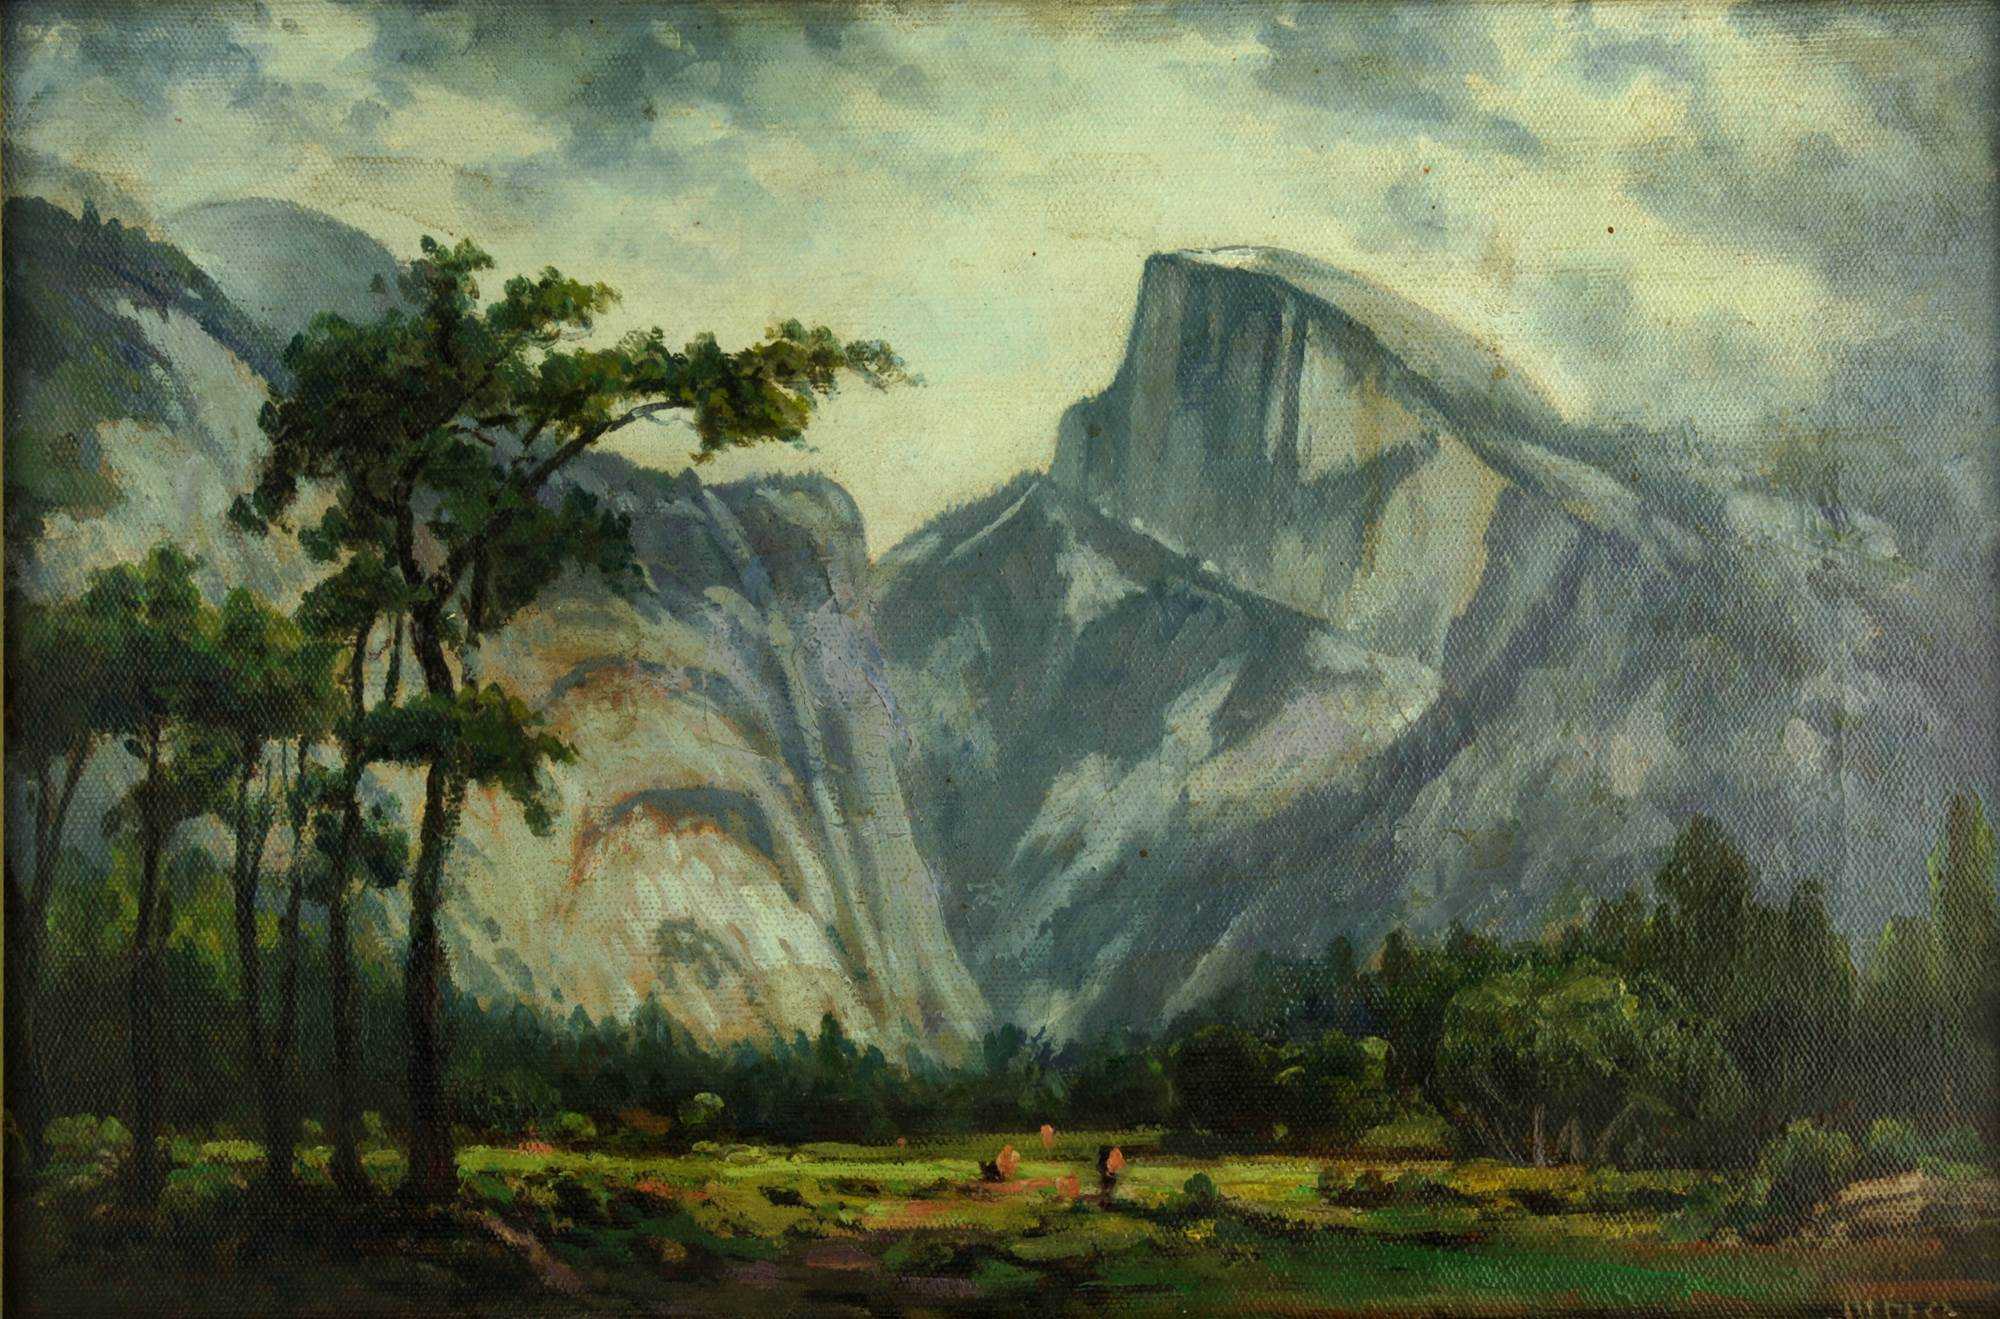 Painting Half Dome and Royal Arches